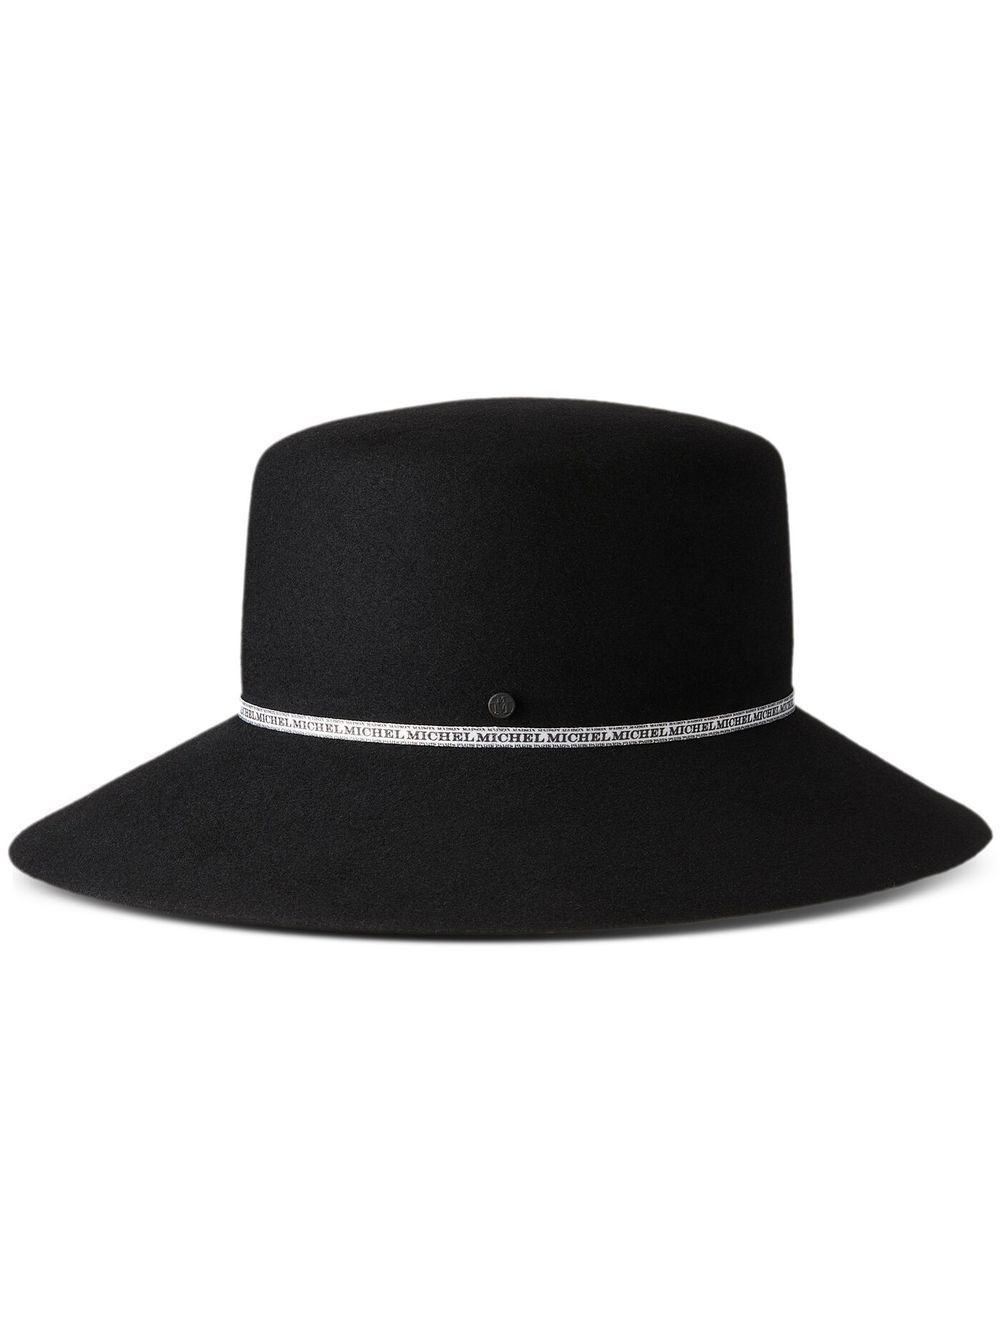 Maison Michel New Kendall Collapsible Hat - Farfetch